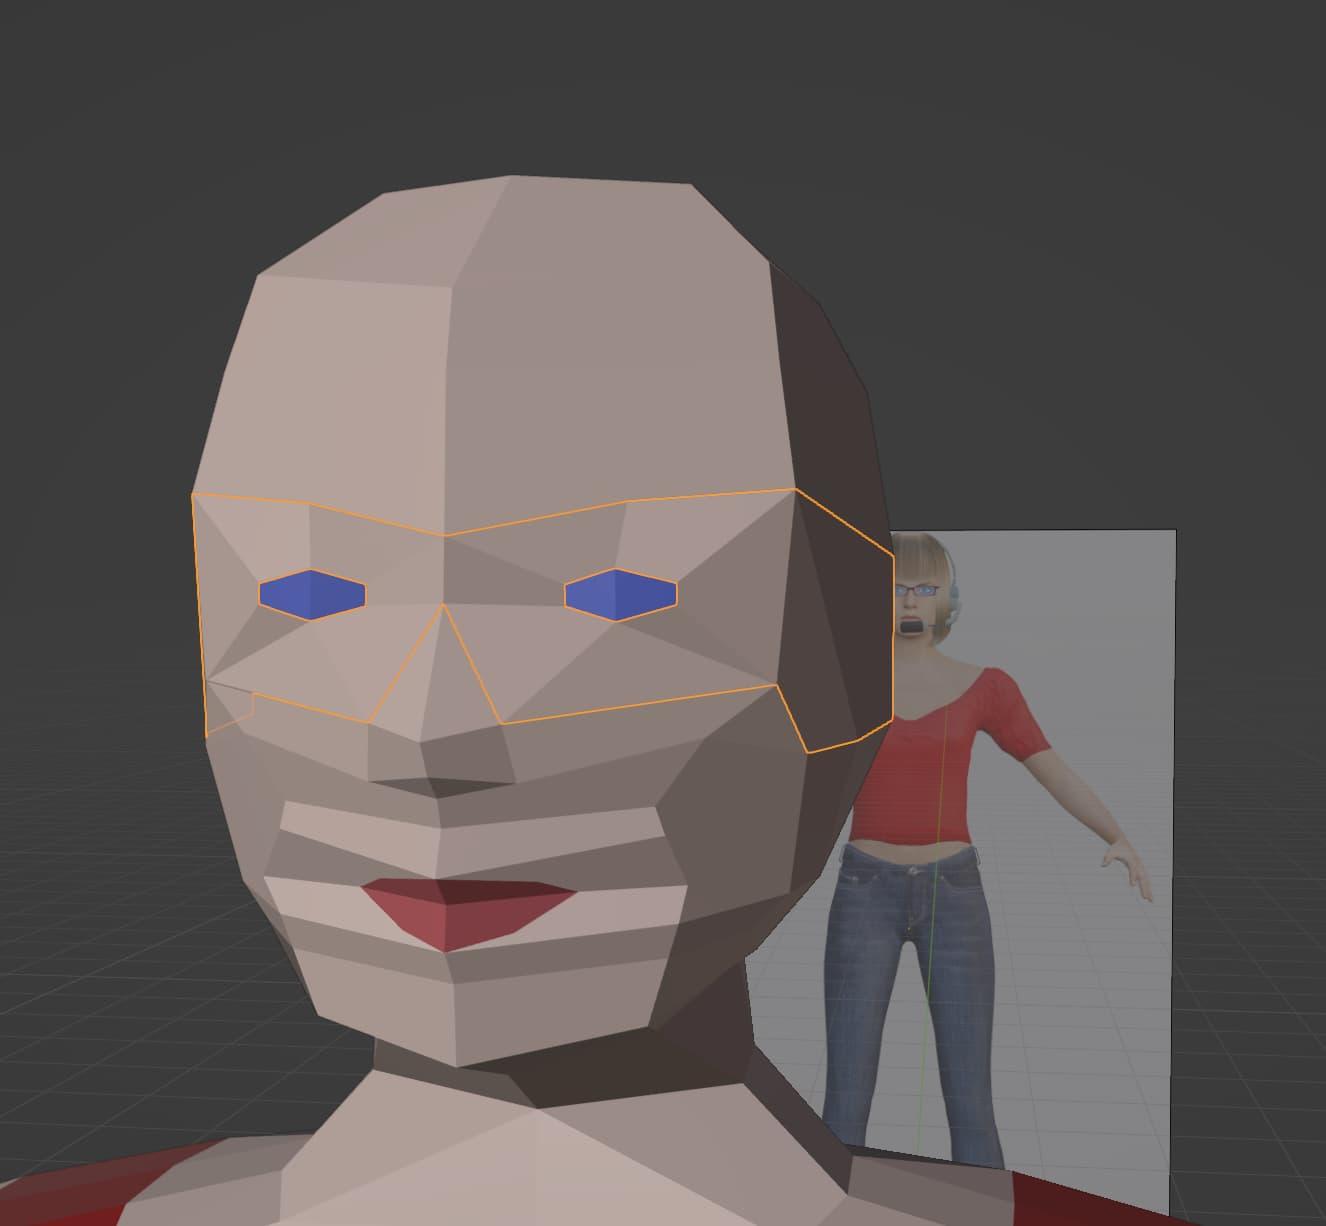 An area around the eyes and sides of the head has been selected